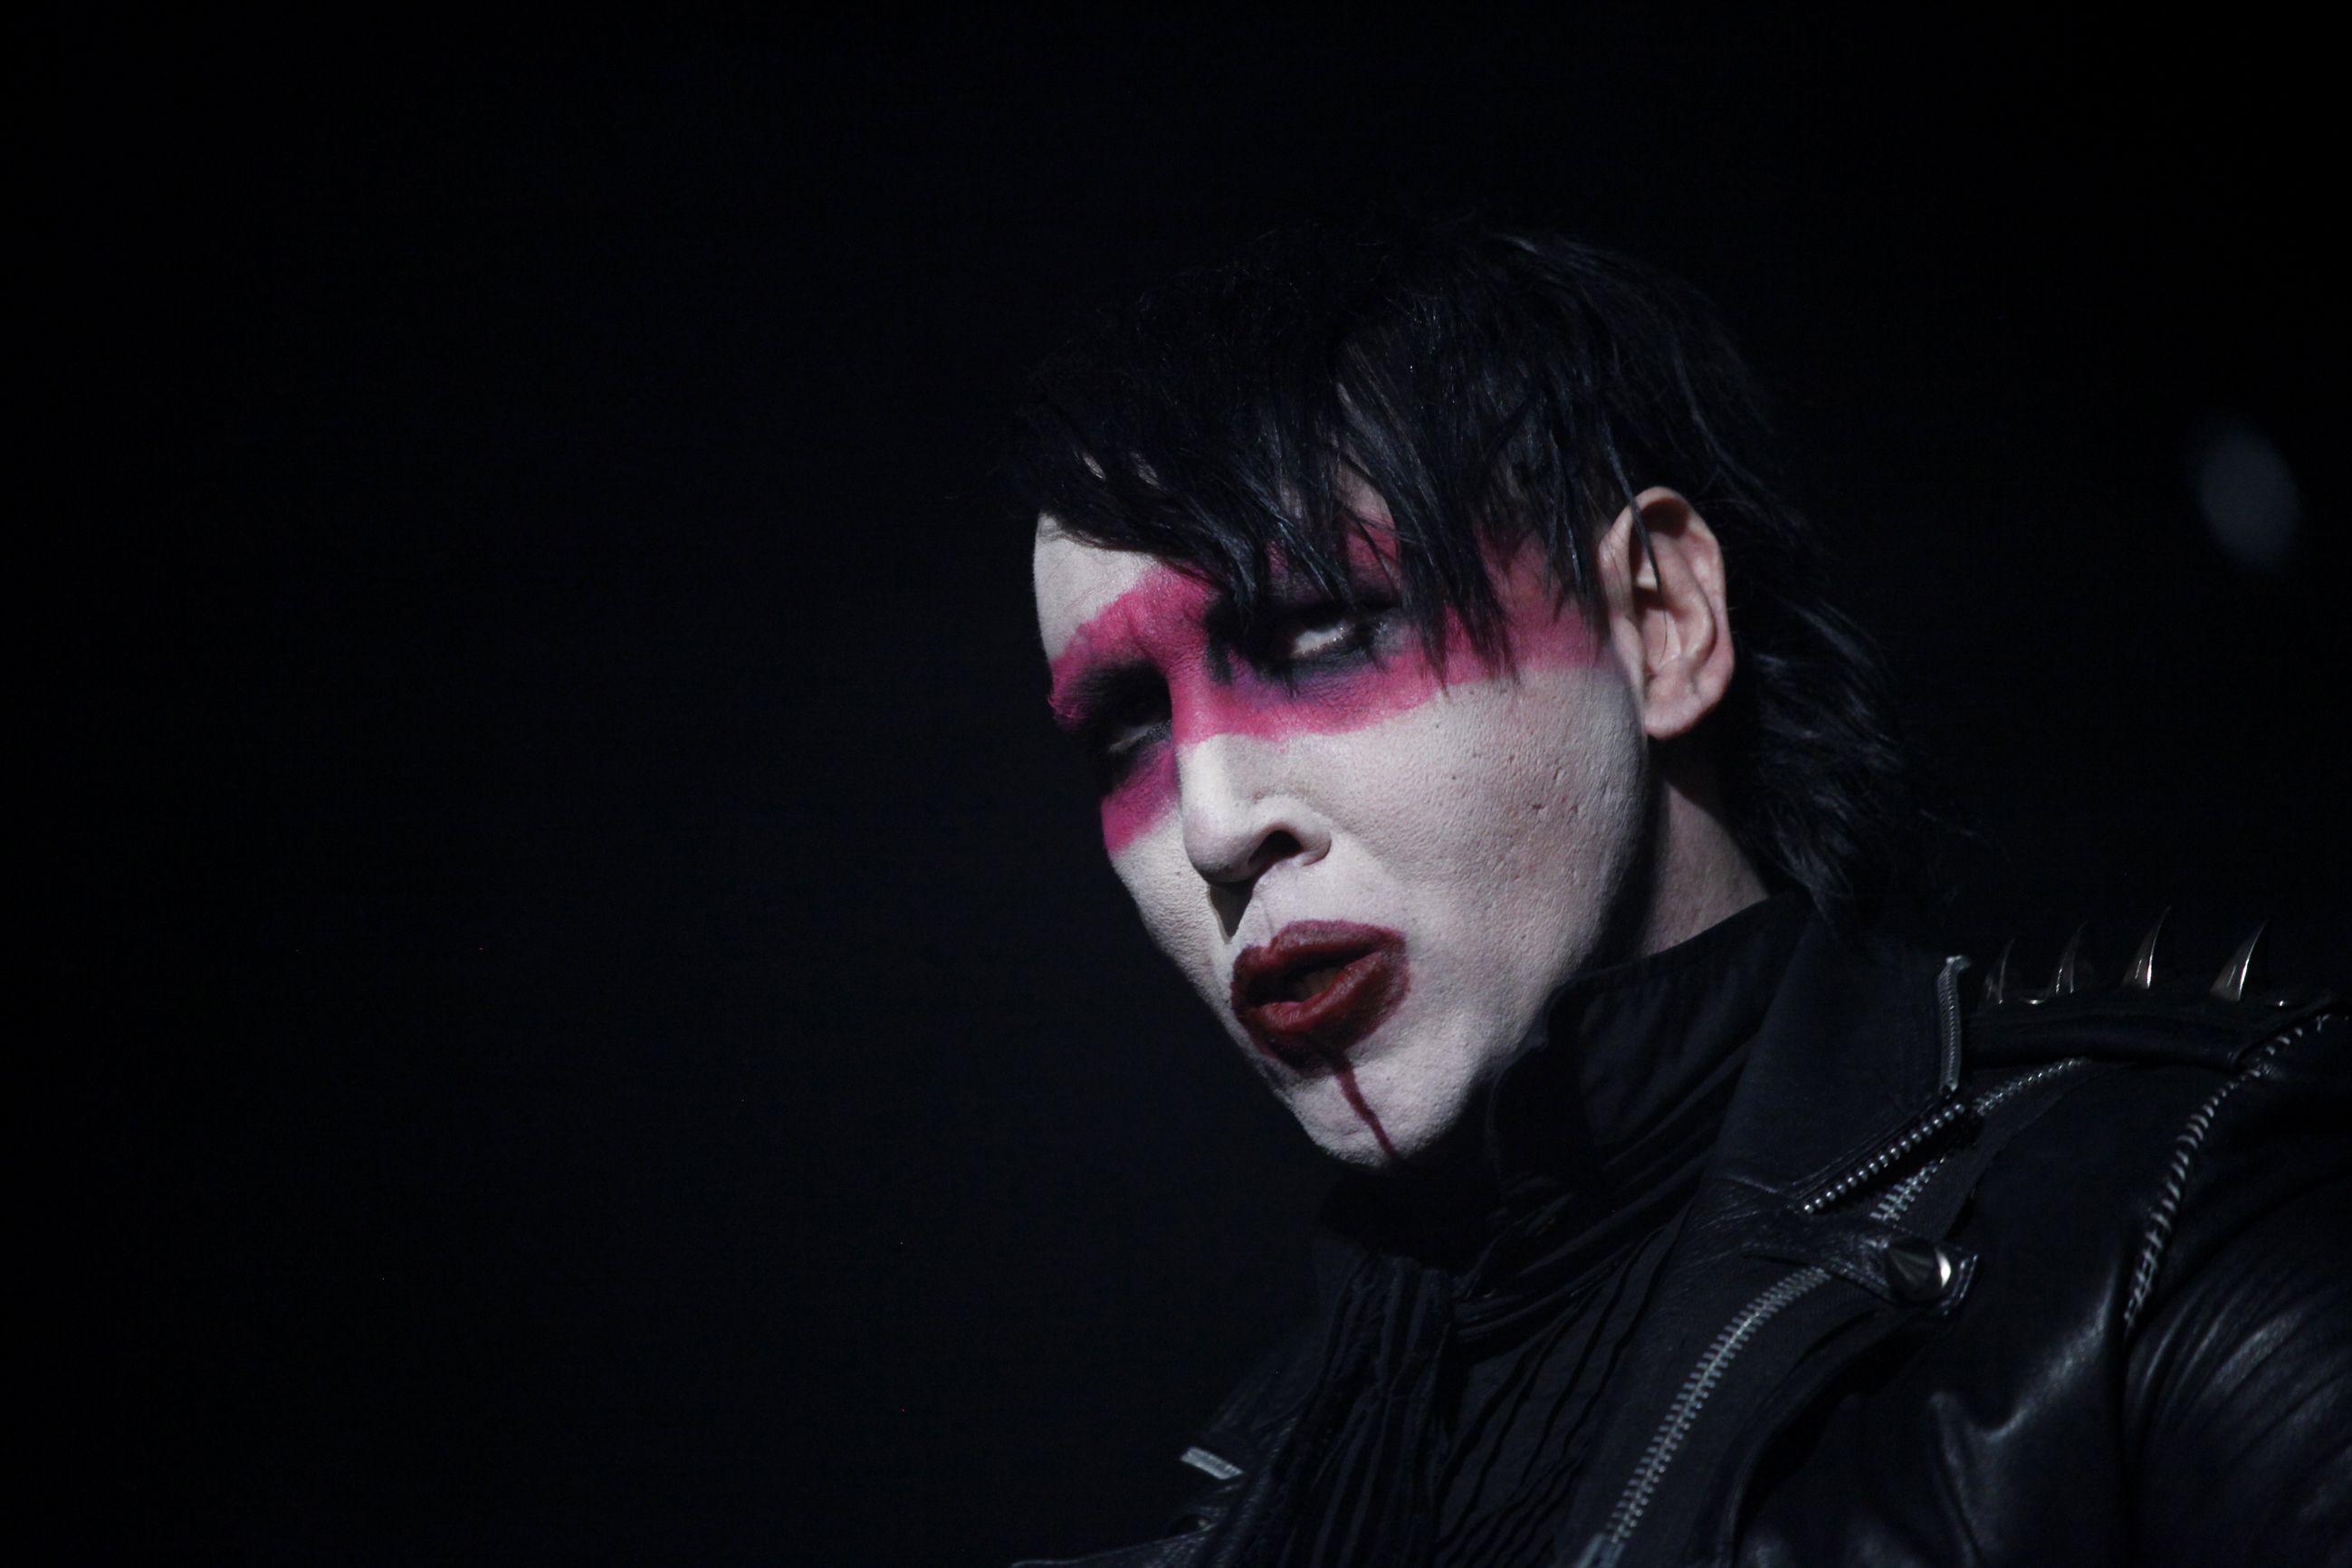 Best 50+ Marilyn Manson Backgrounds on HipWallpapers.